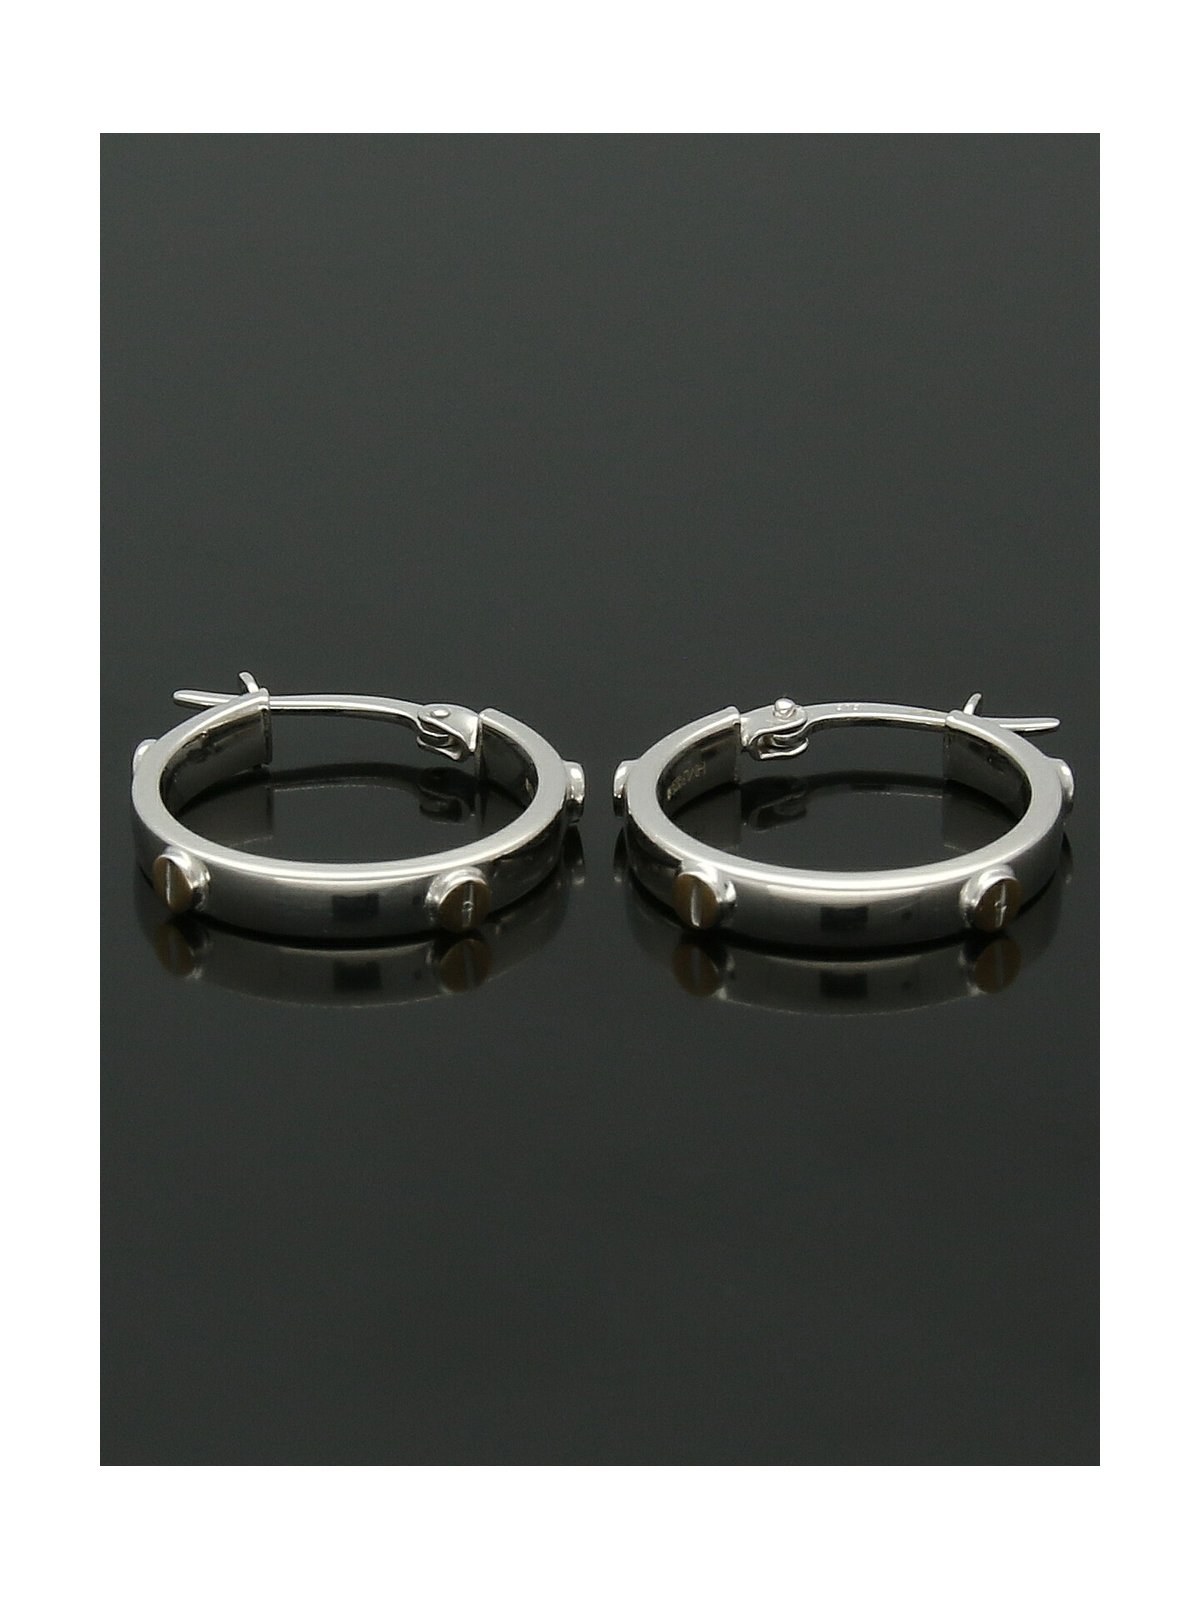 Hoop Earrings with Gold Screws 18mm in 9ct White Gold